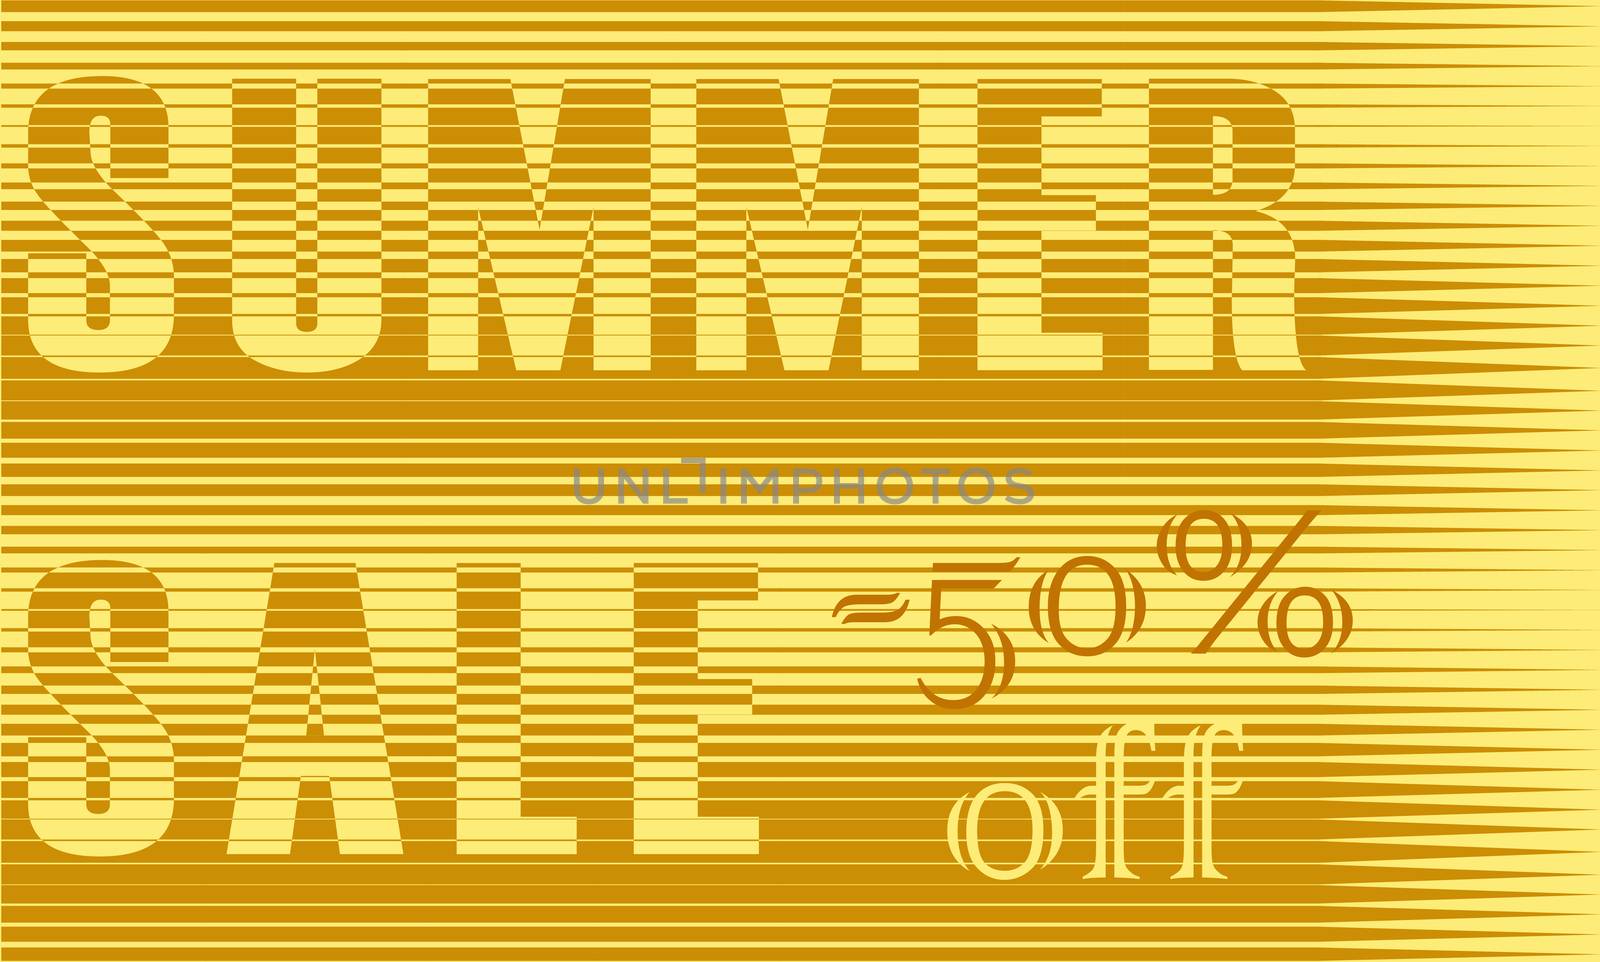 Summer Sale Inscription. Striped  Yellow Letters. Illustration